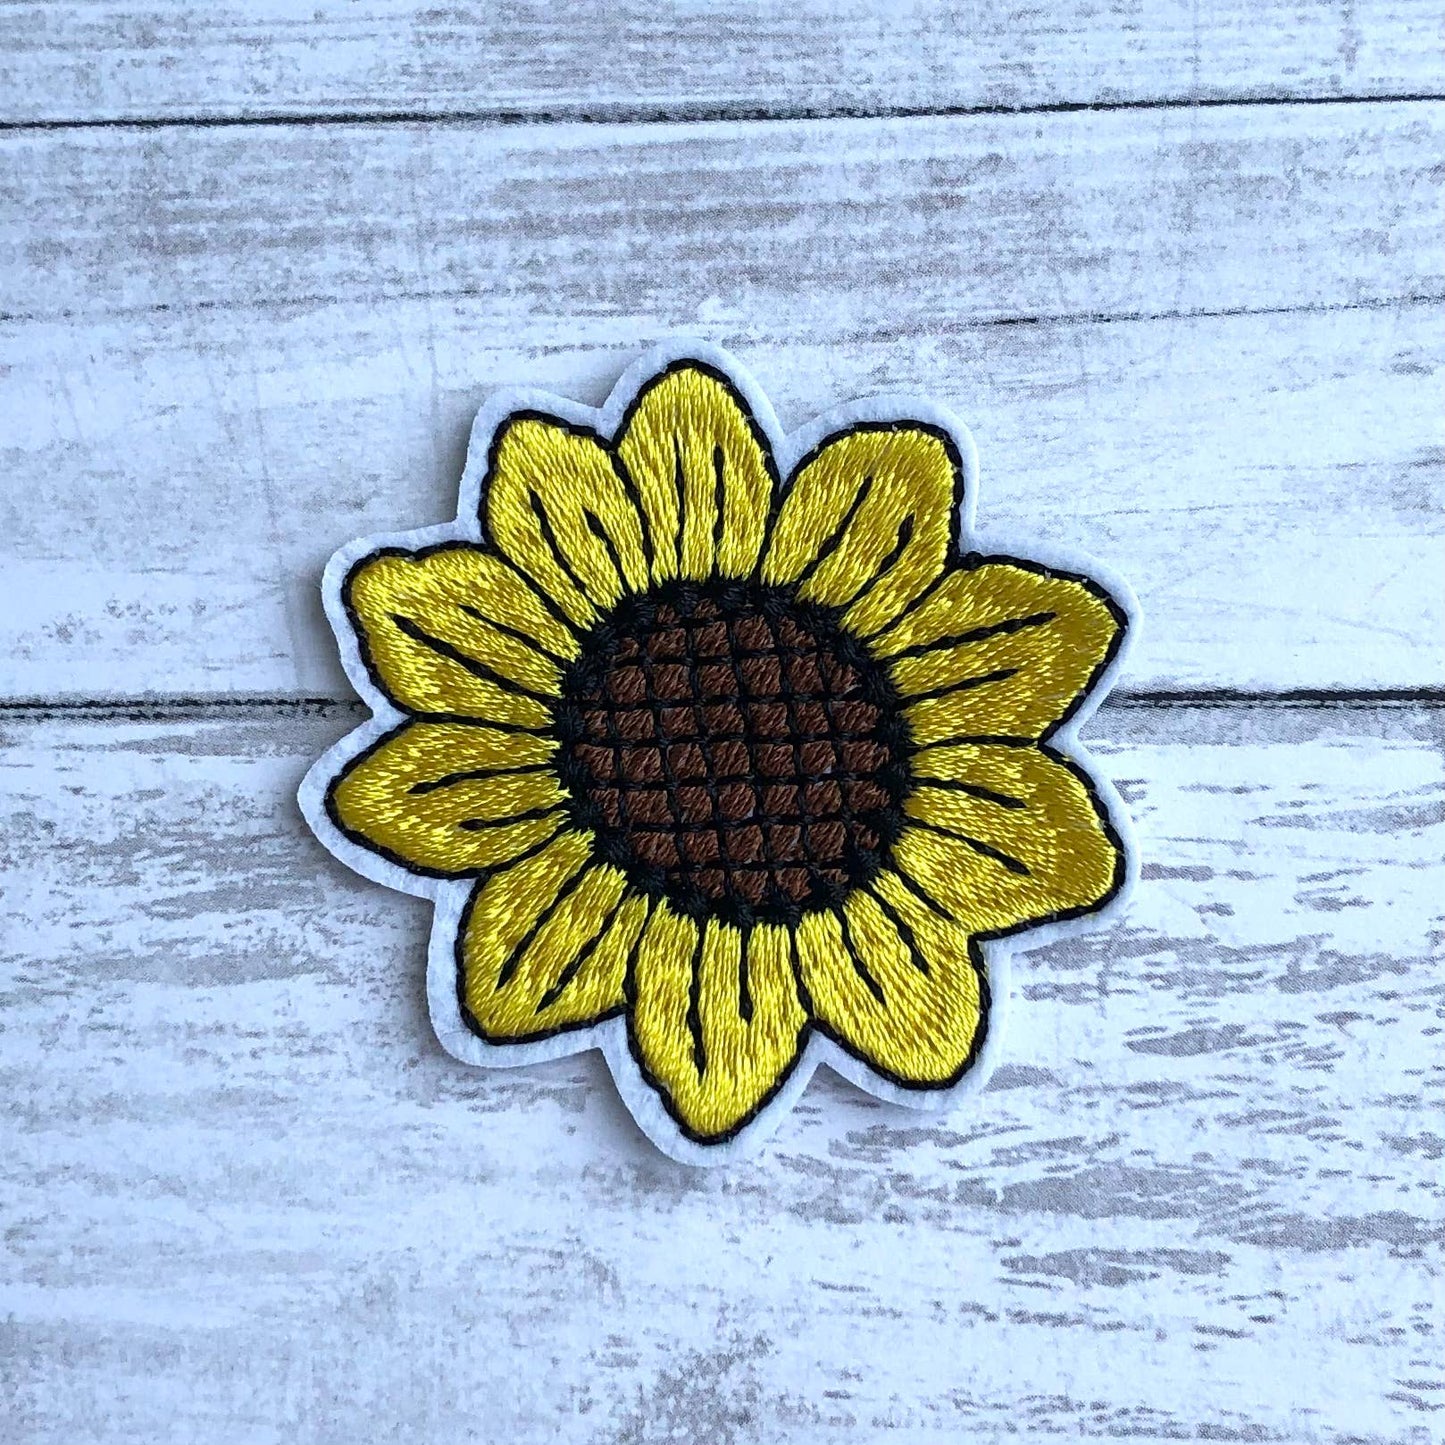 Sunflower Iron on Embroidered Patch